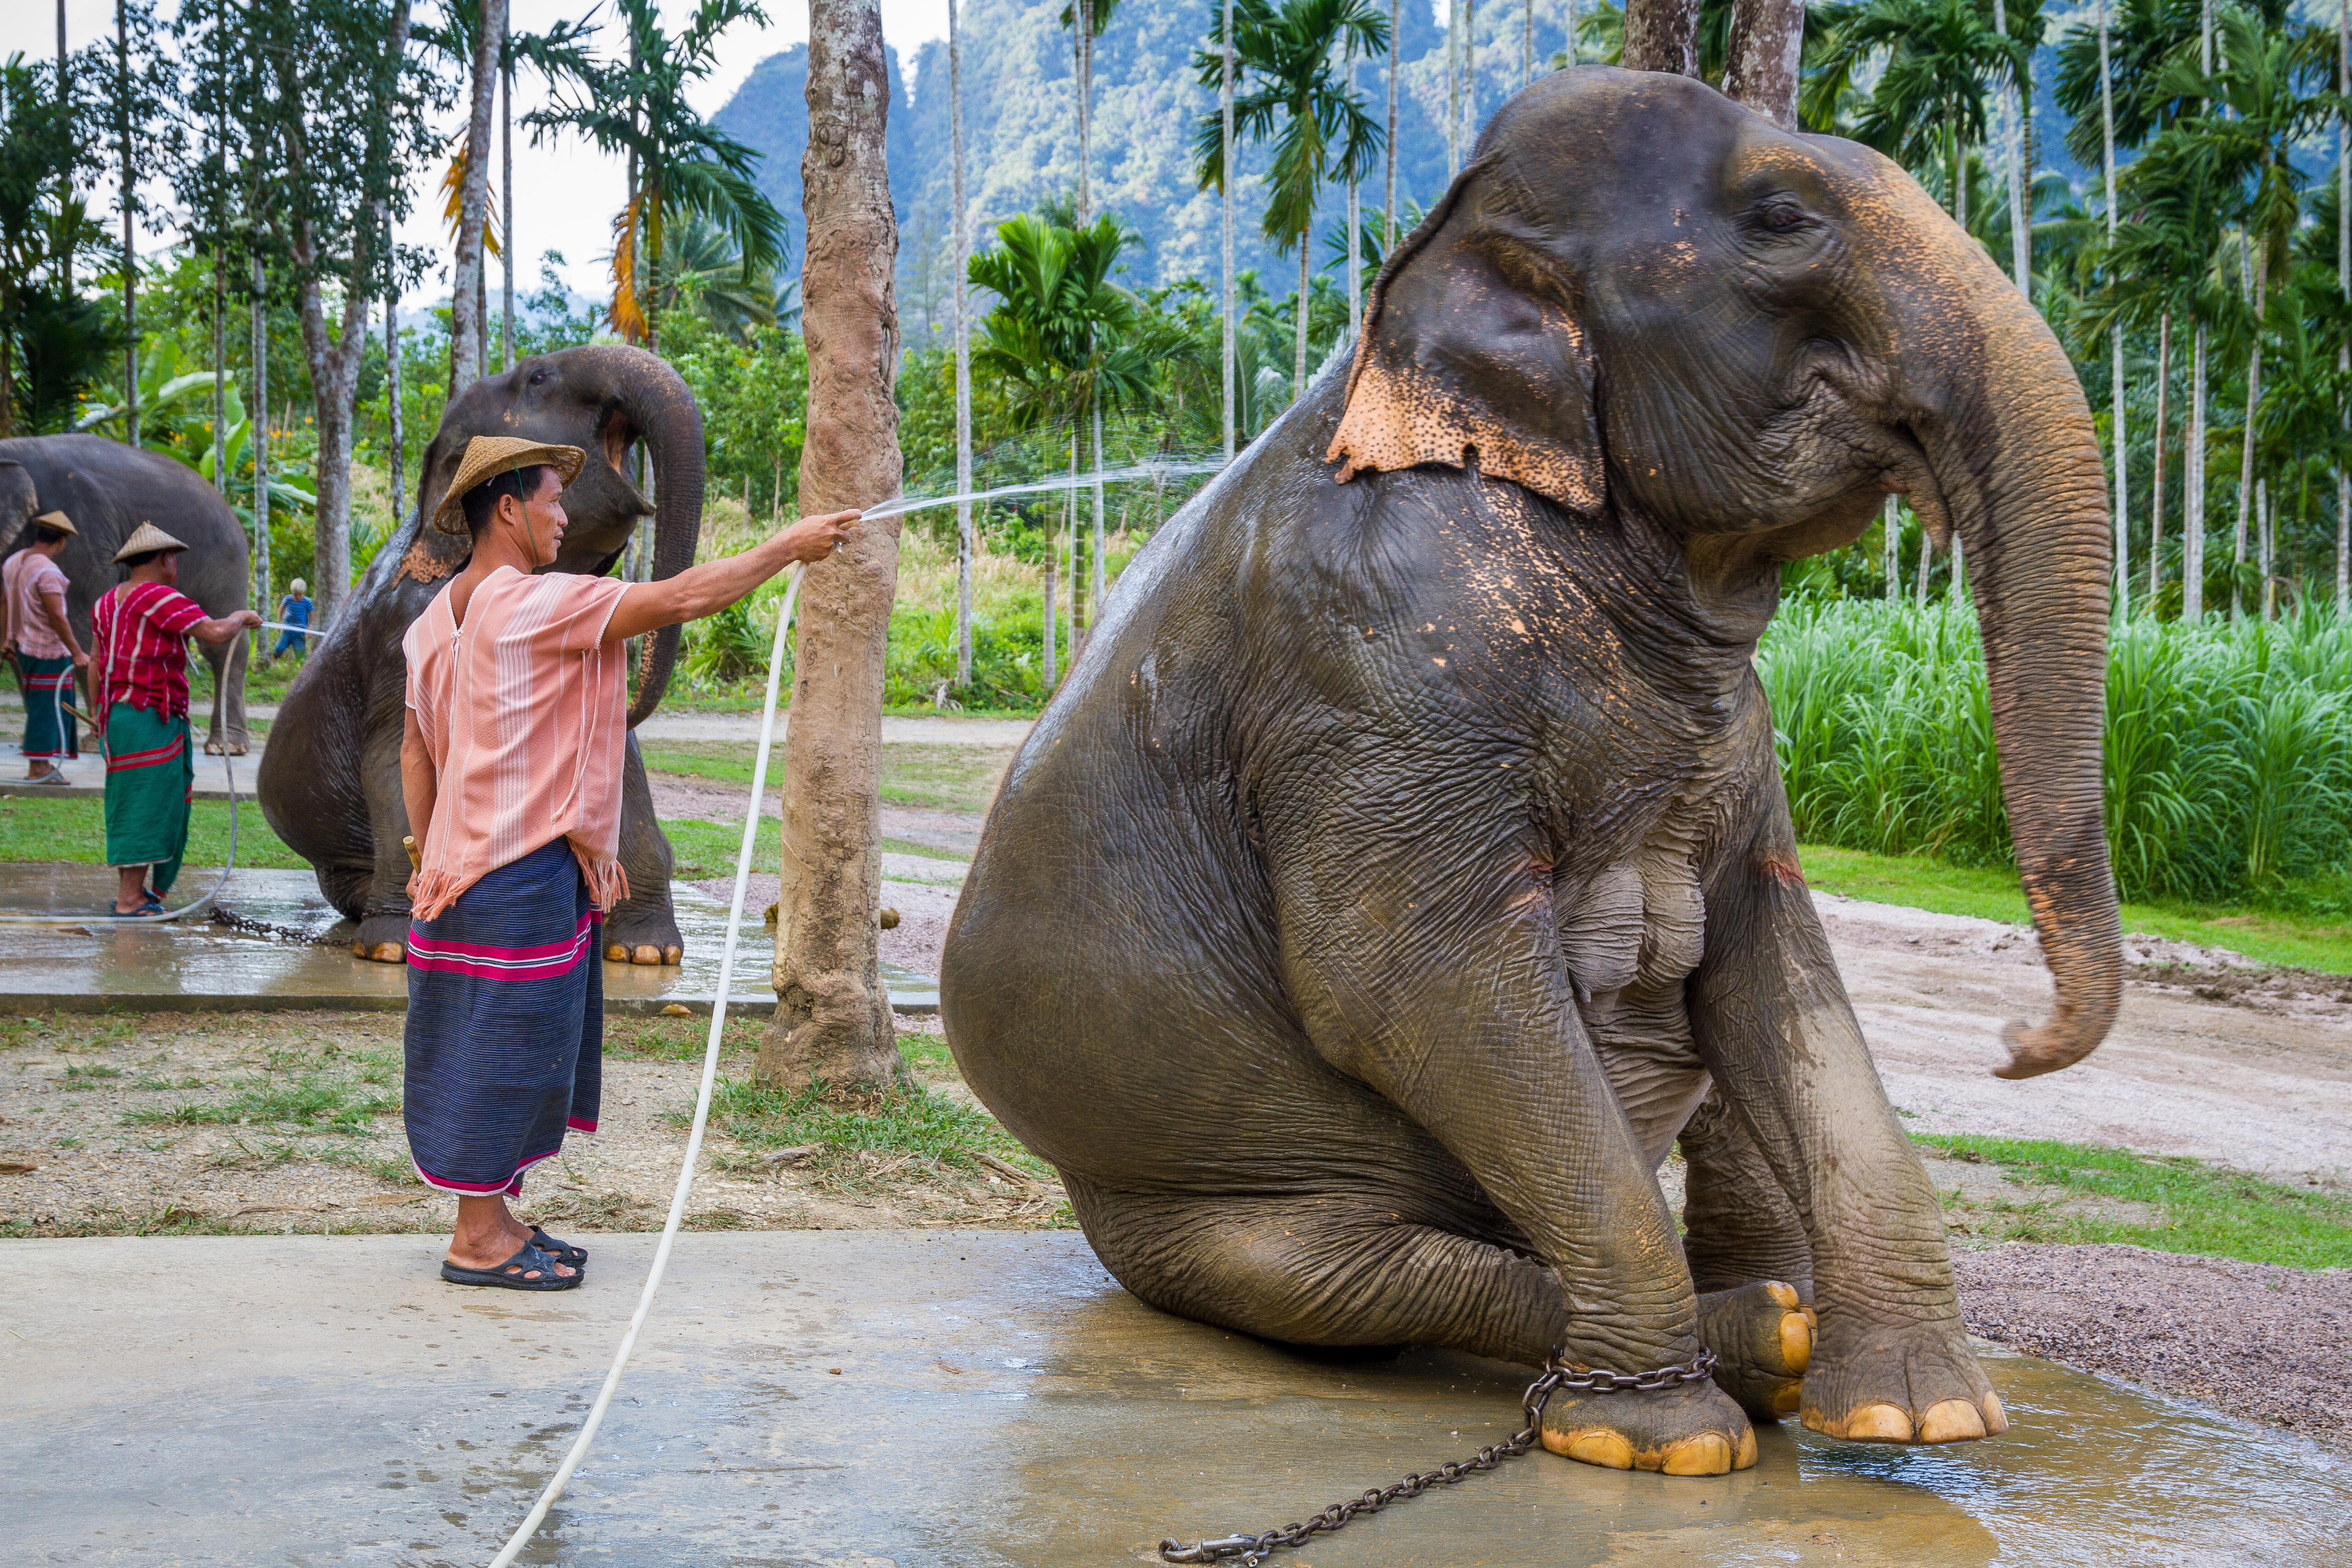 Mahout cleaning his elephant at Elephant Hills, Khao Sok National Park, Thailand. Photo taken on December 8, 2009.